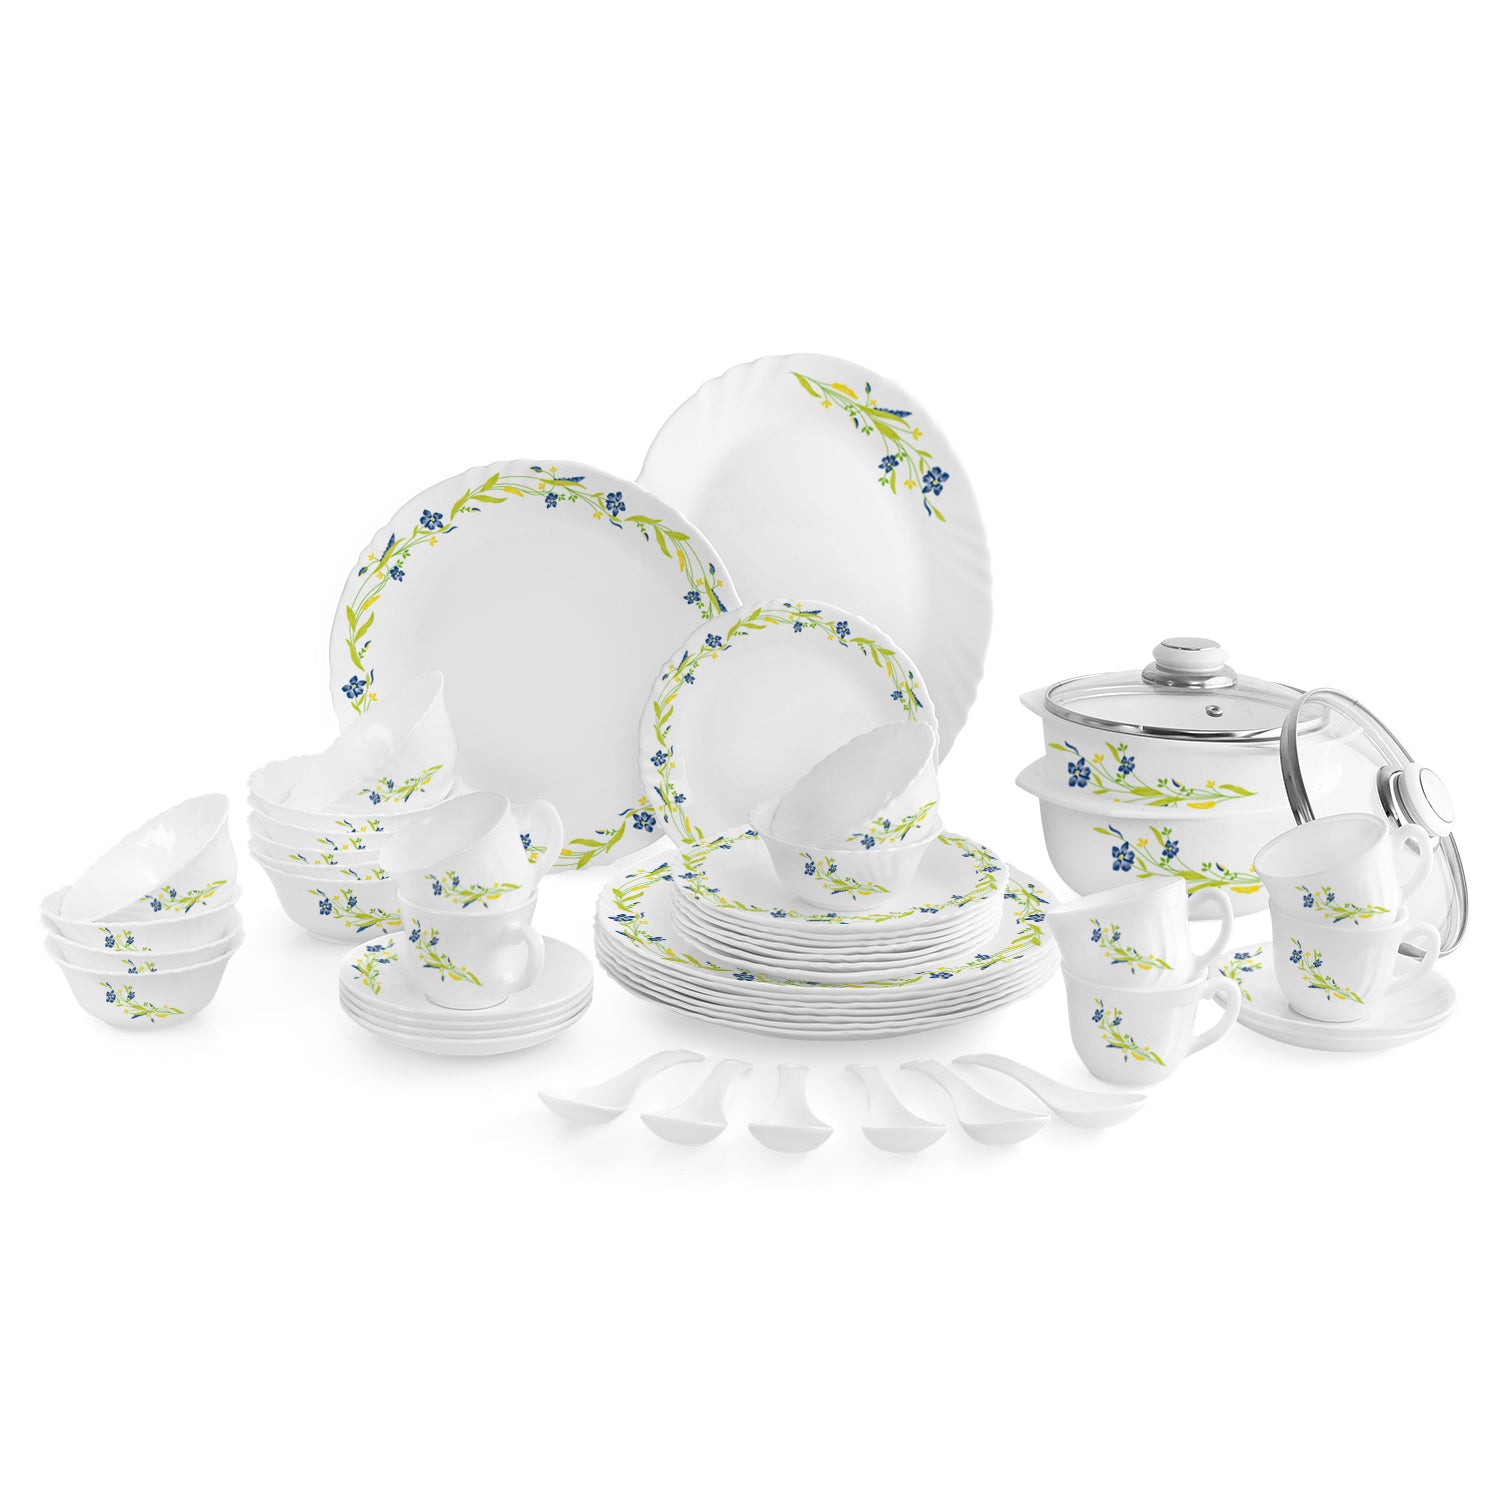 Imperial Series 35 Pieces Opalware Dinner Set for Family of 6 Amazon Creper